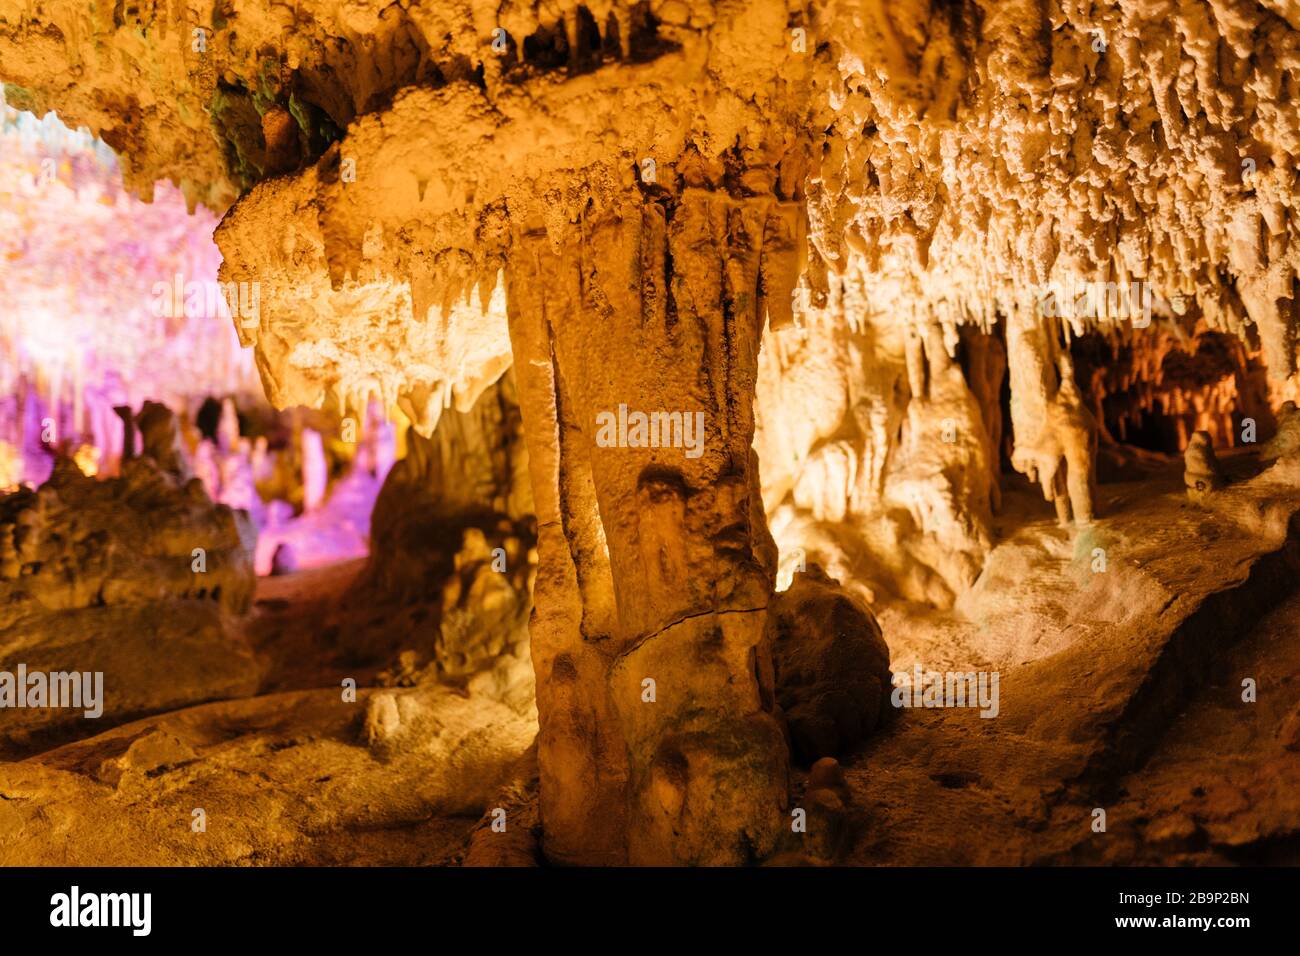 Beautiful shot of stalactite formation in Stalactite Cave, Israel Stock Photo